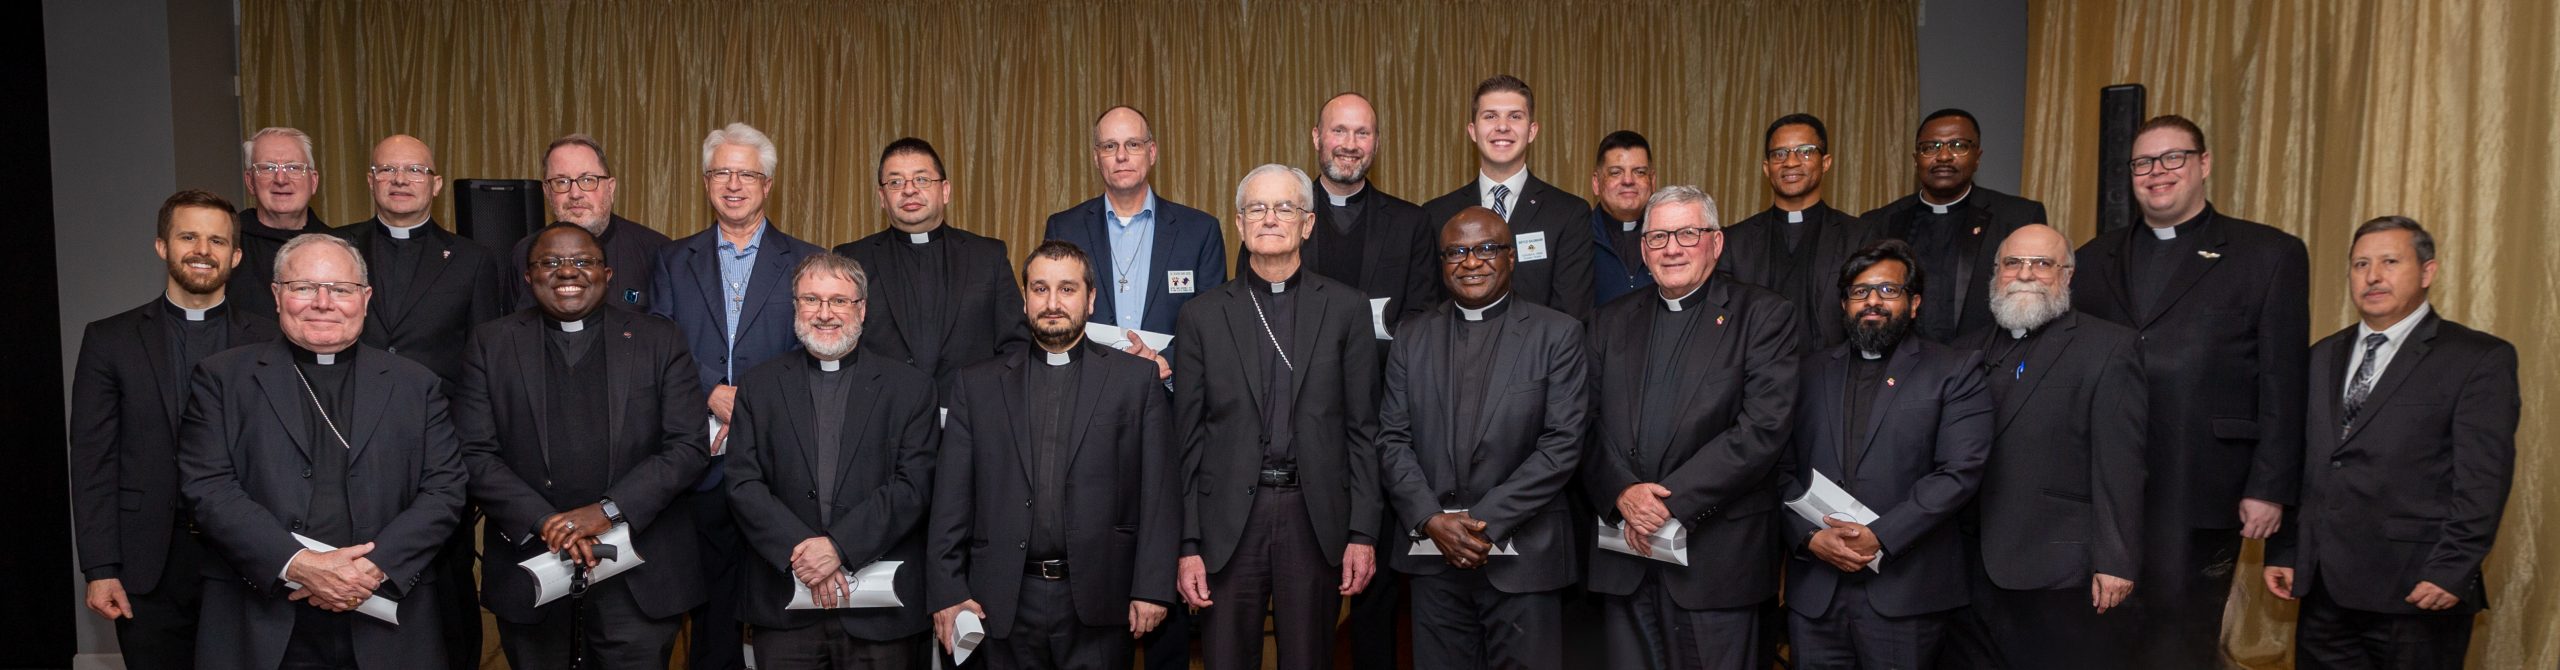 Dallas Diocese Clergy at DDC Banquet